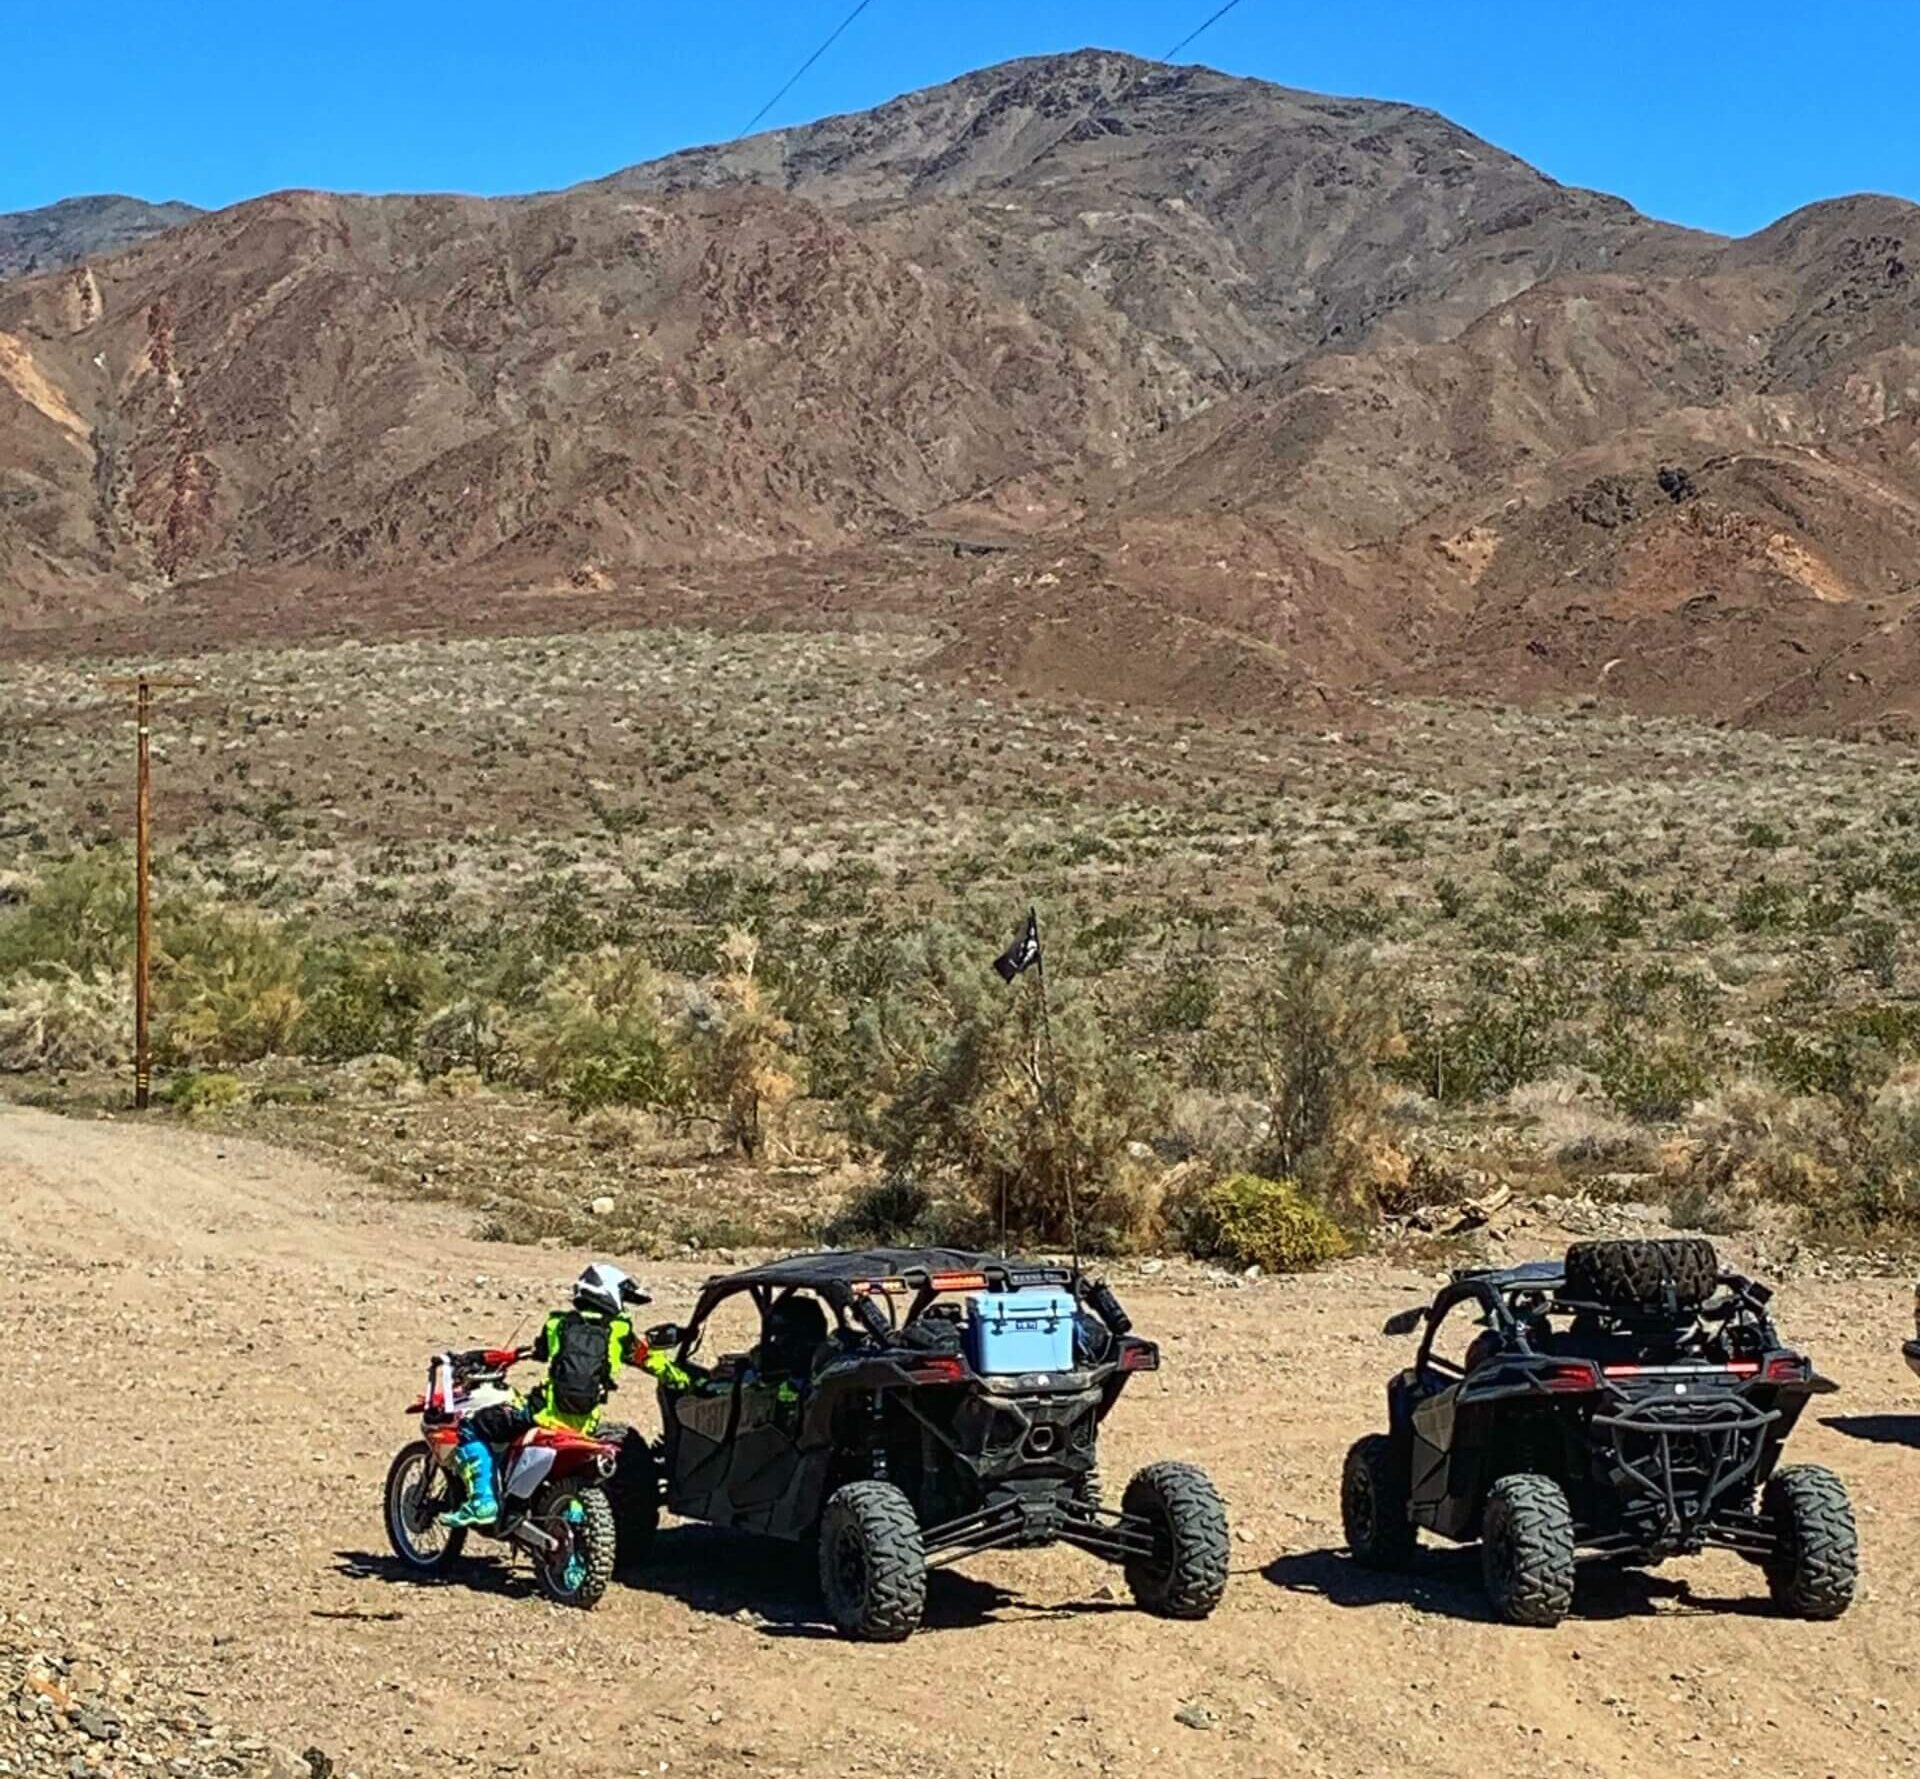 A pair of OHVs and motorcycle on a desert offroading trail.